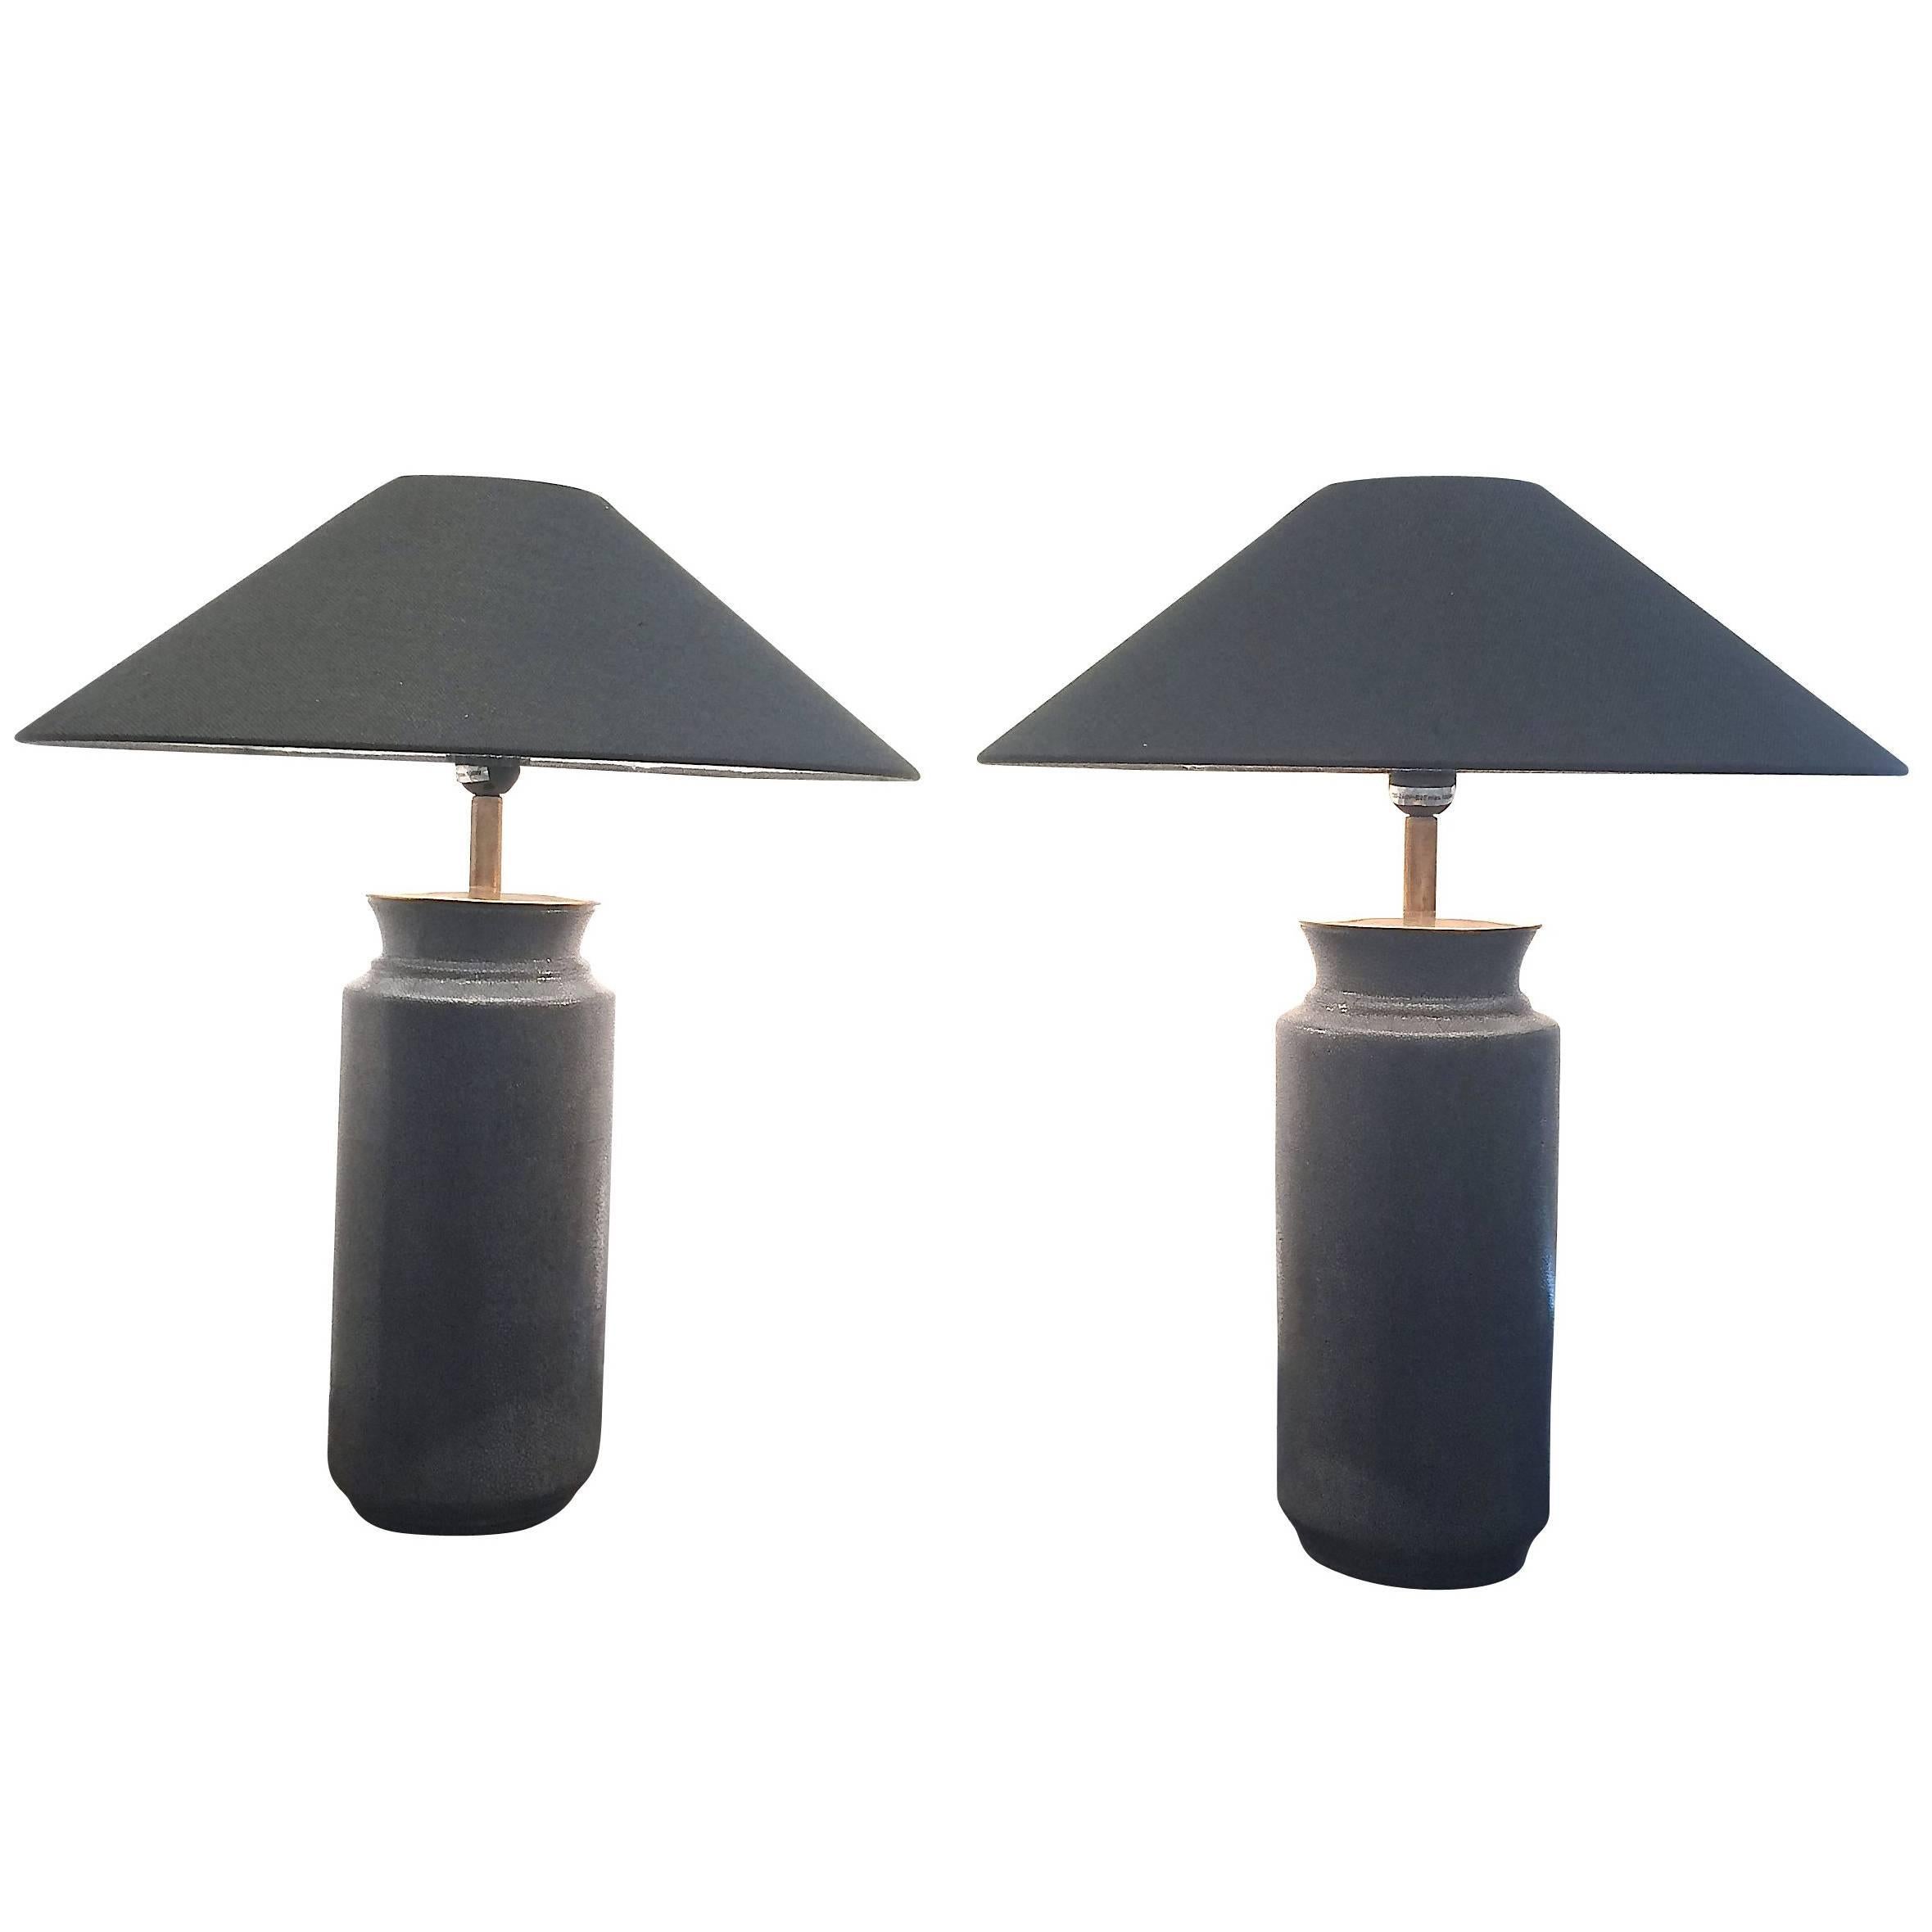 Faux Shagreen Porcelain Pair of Grey Table Lamps, China, Contemporary